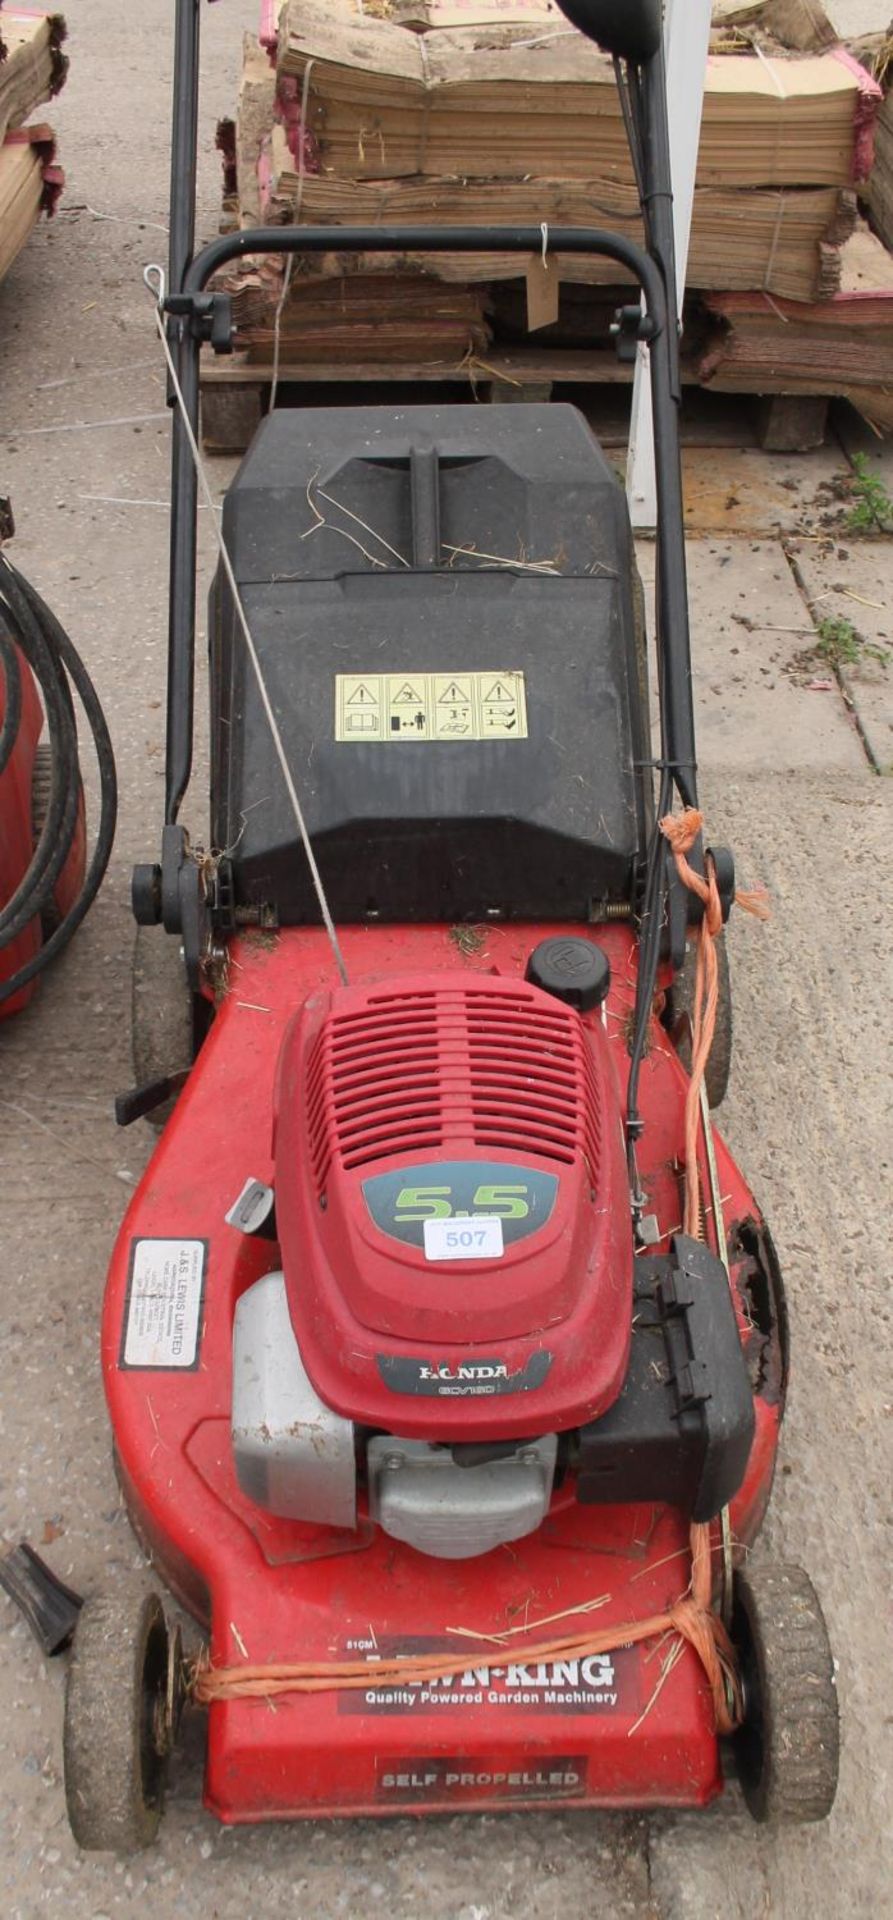 A PETROL LAWN KING MOWER WITH HONDA ENGINE AND GRASS BOX ENGINE 100 %+VAT